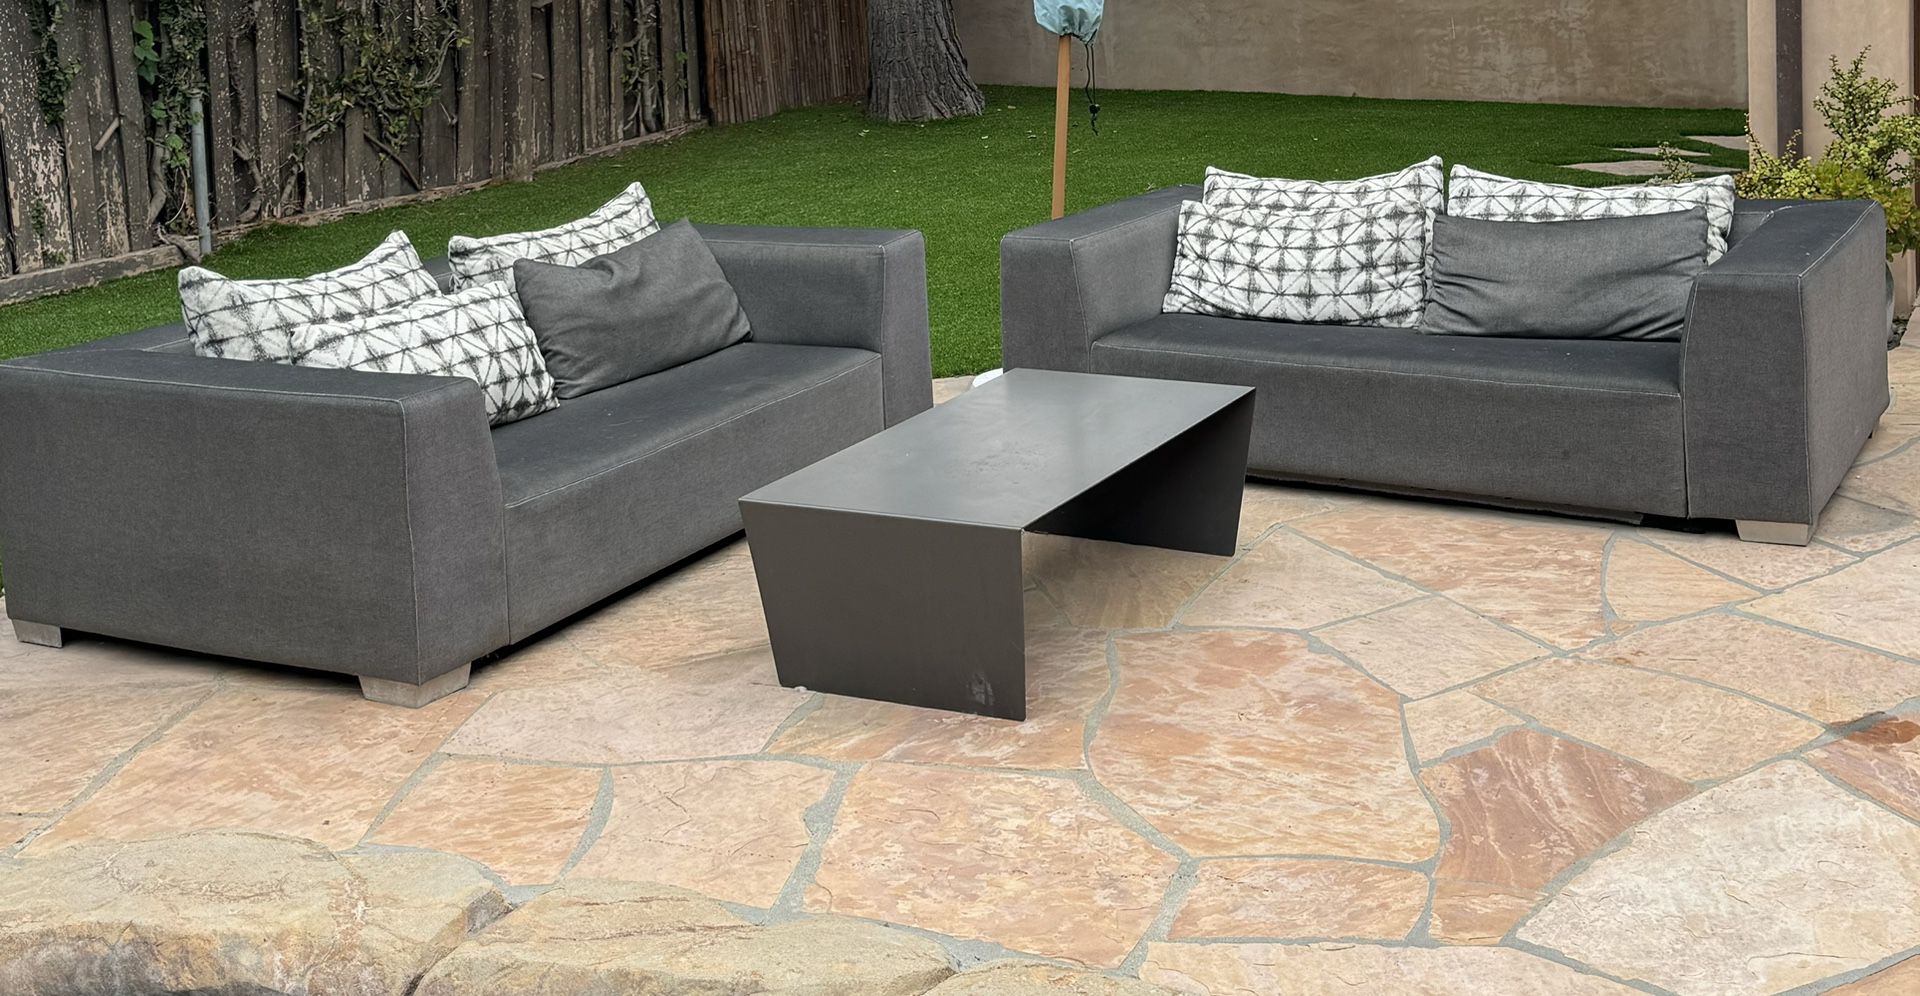 Large Outdoor Sofas And Coffee Table 